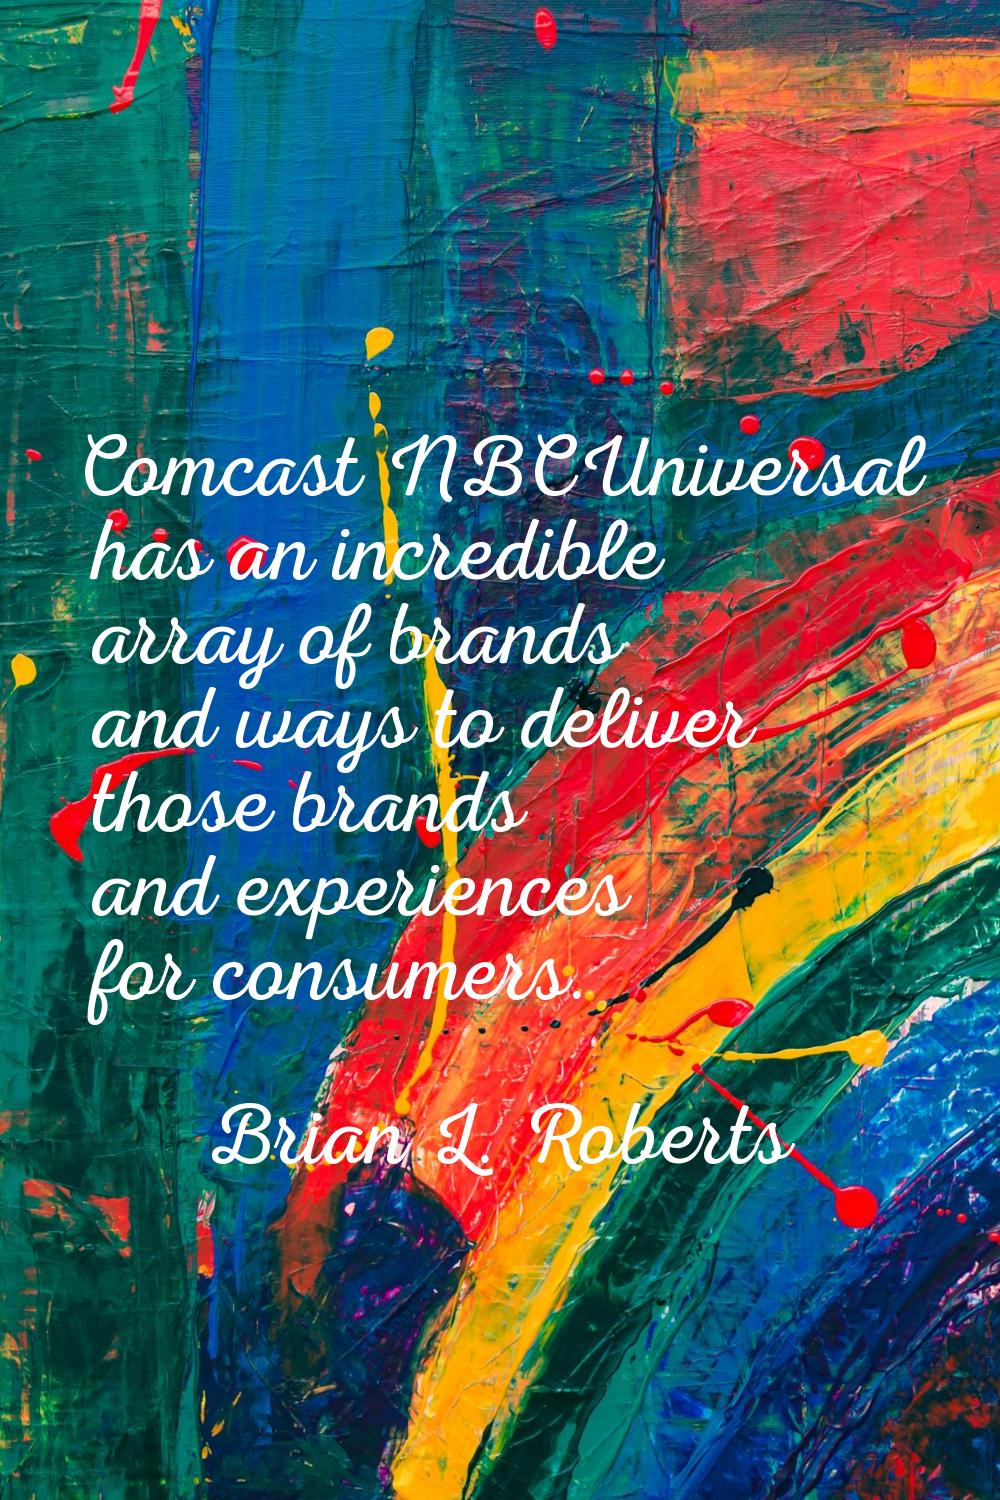 Comcast NBCUniversal has an incredible array of brands and ways to deliver those brands and experie